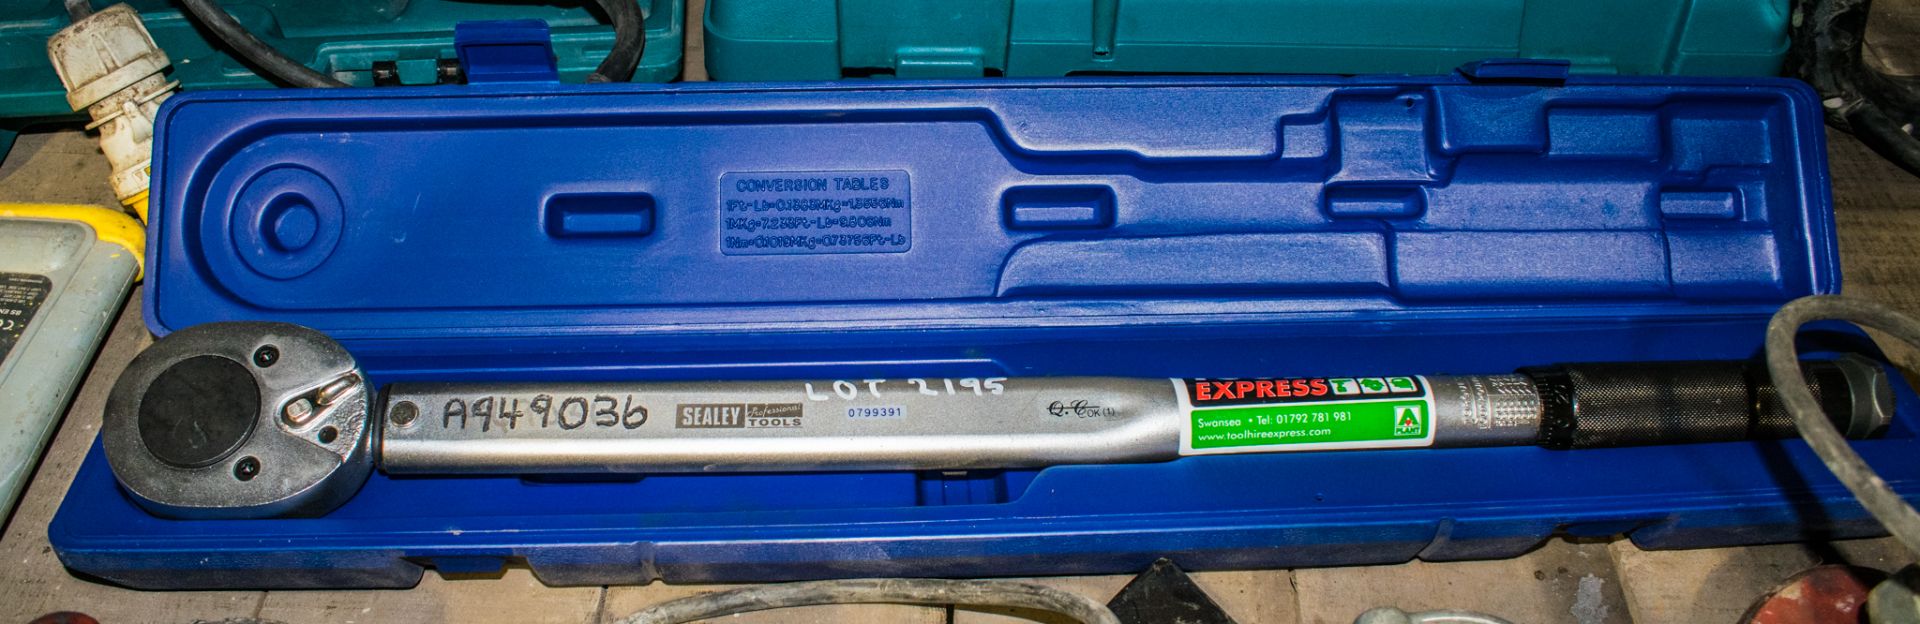 Sealey torque wrench c/w carry case A949036